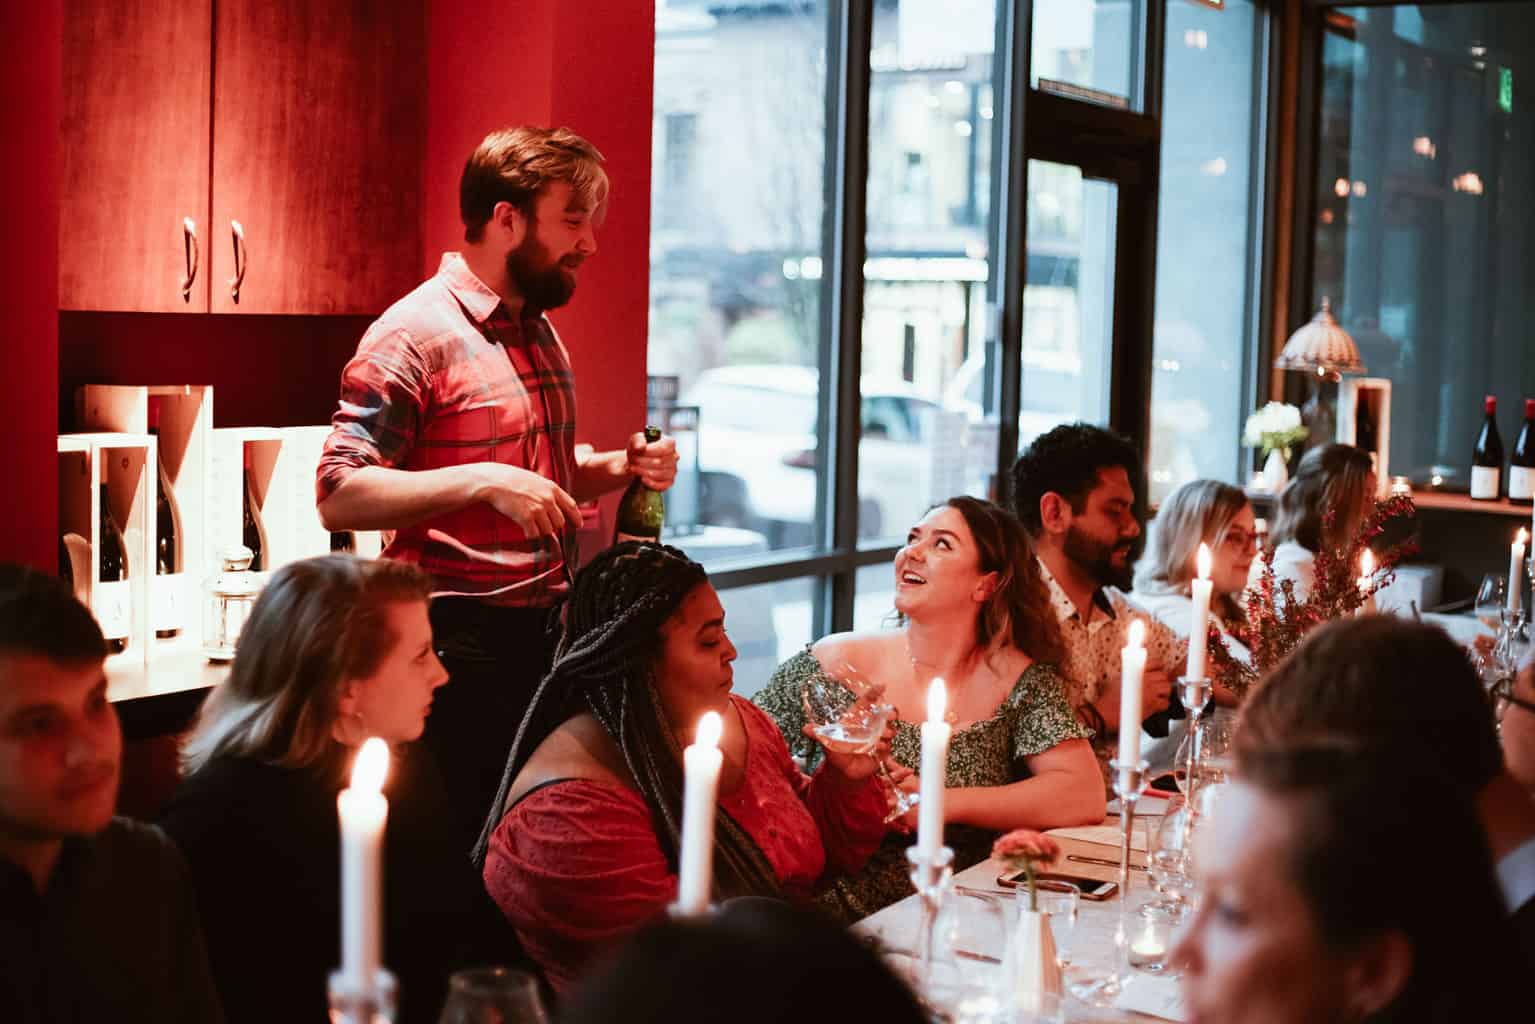 Alex Fullerton leads a wine dinner at the Fullerton Wine Bar and Tasting Room in Portland